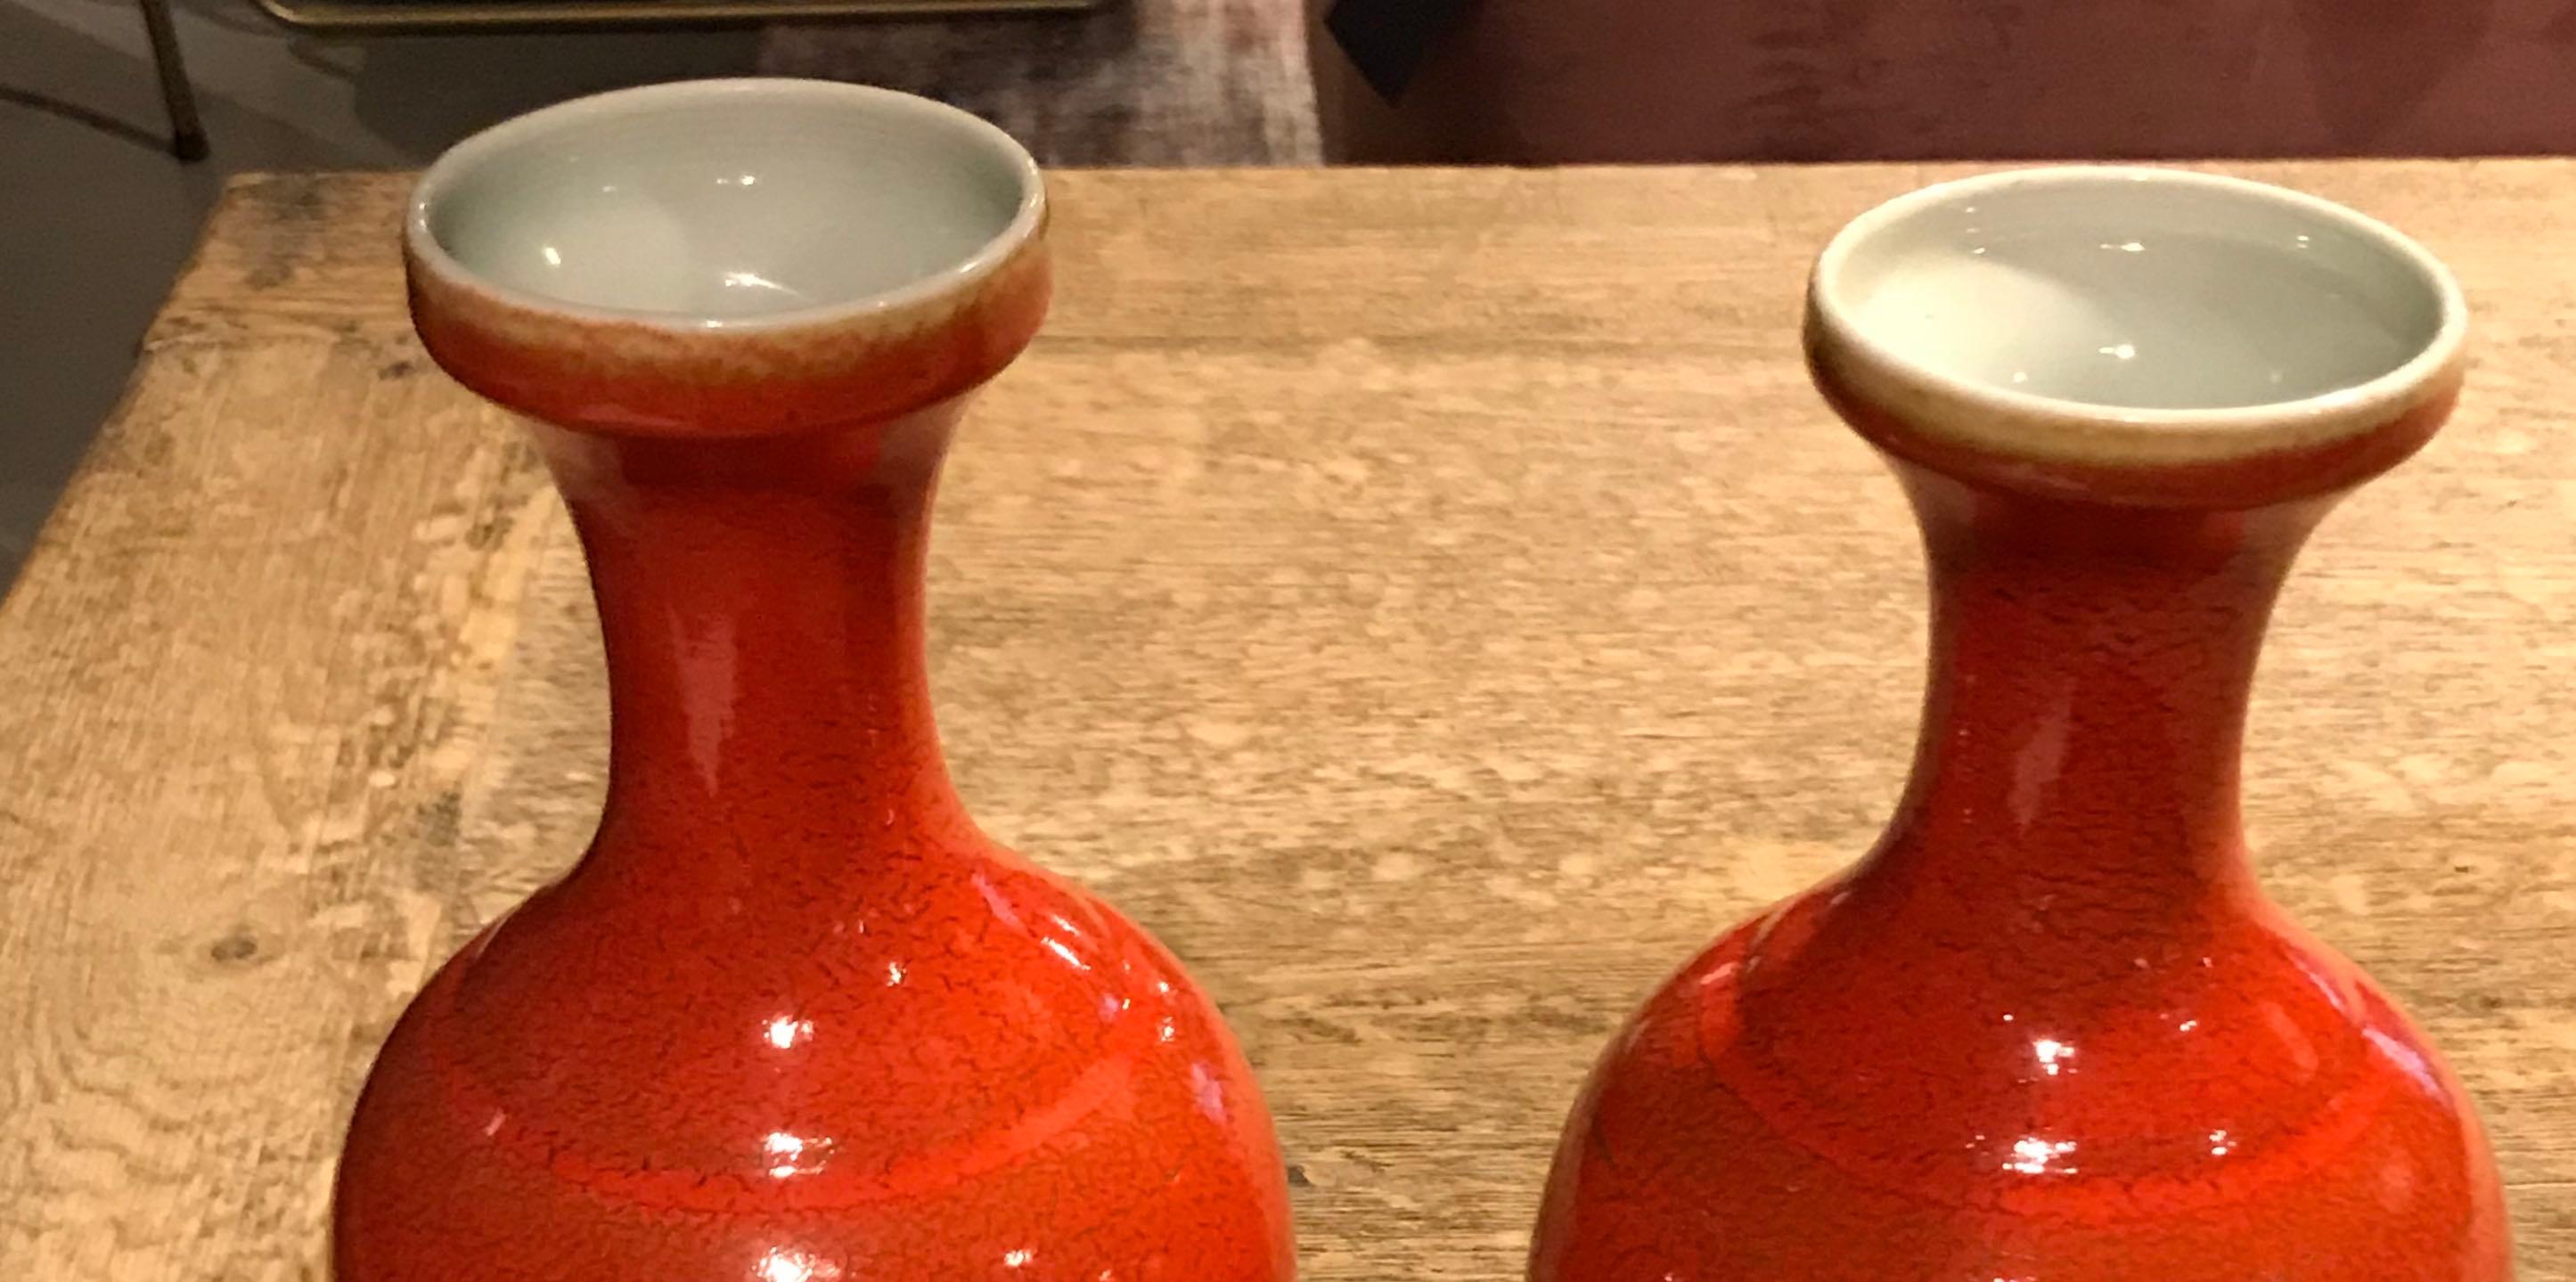 Contemporary Chinese orange glazed thin necked porcelain vase
Two are available
Sits nicely with S5125.